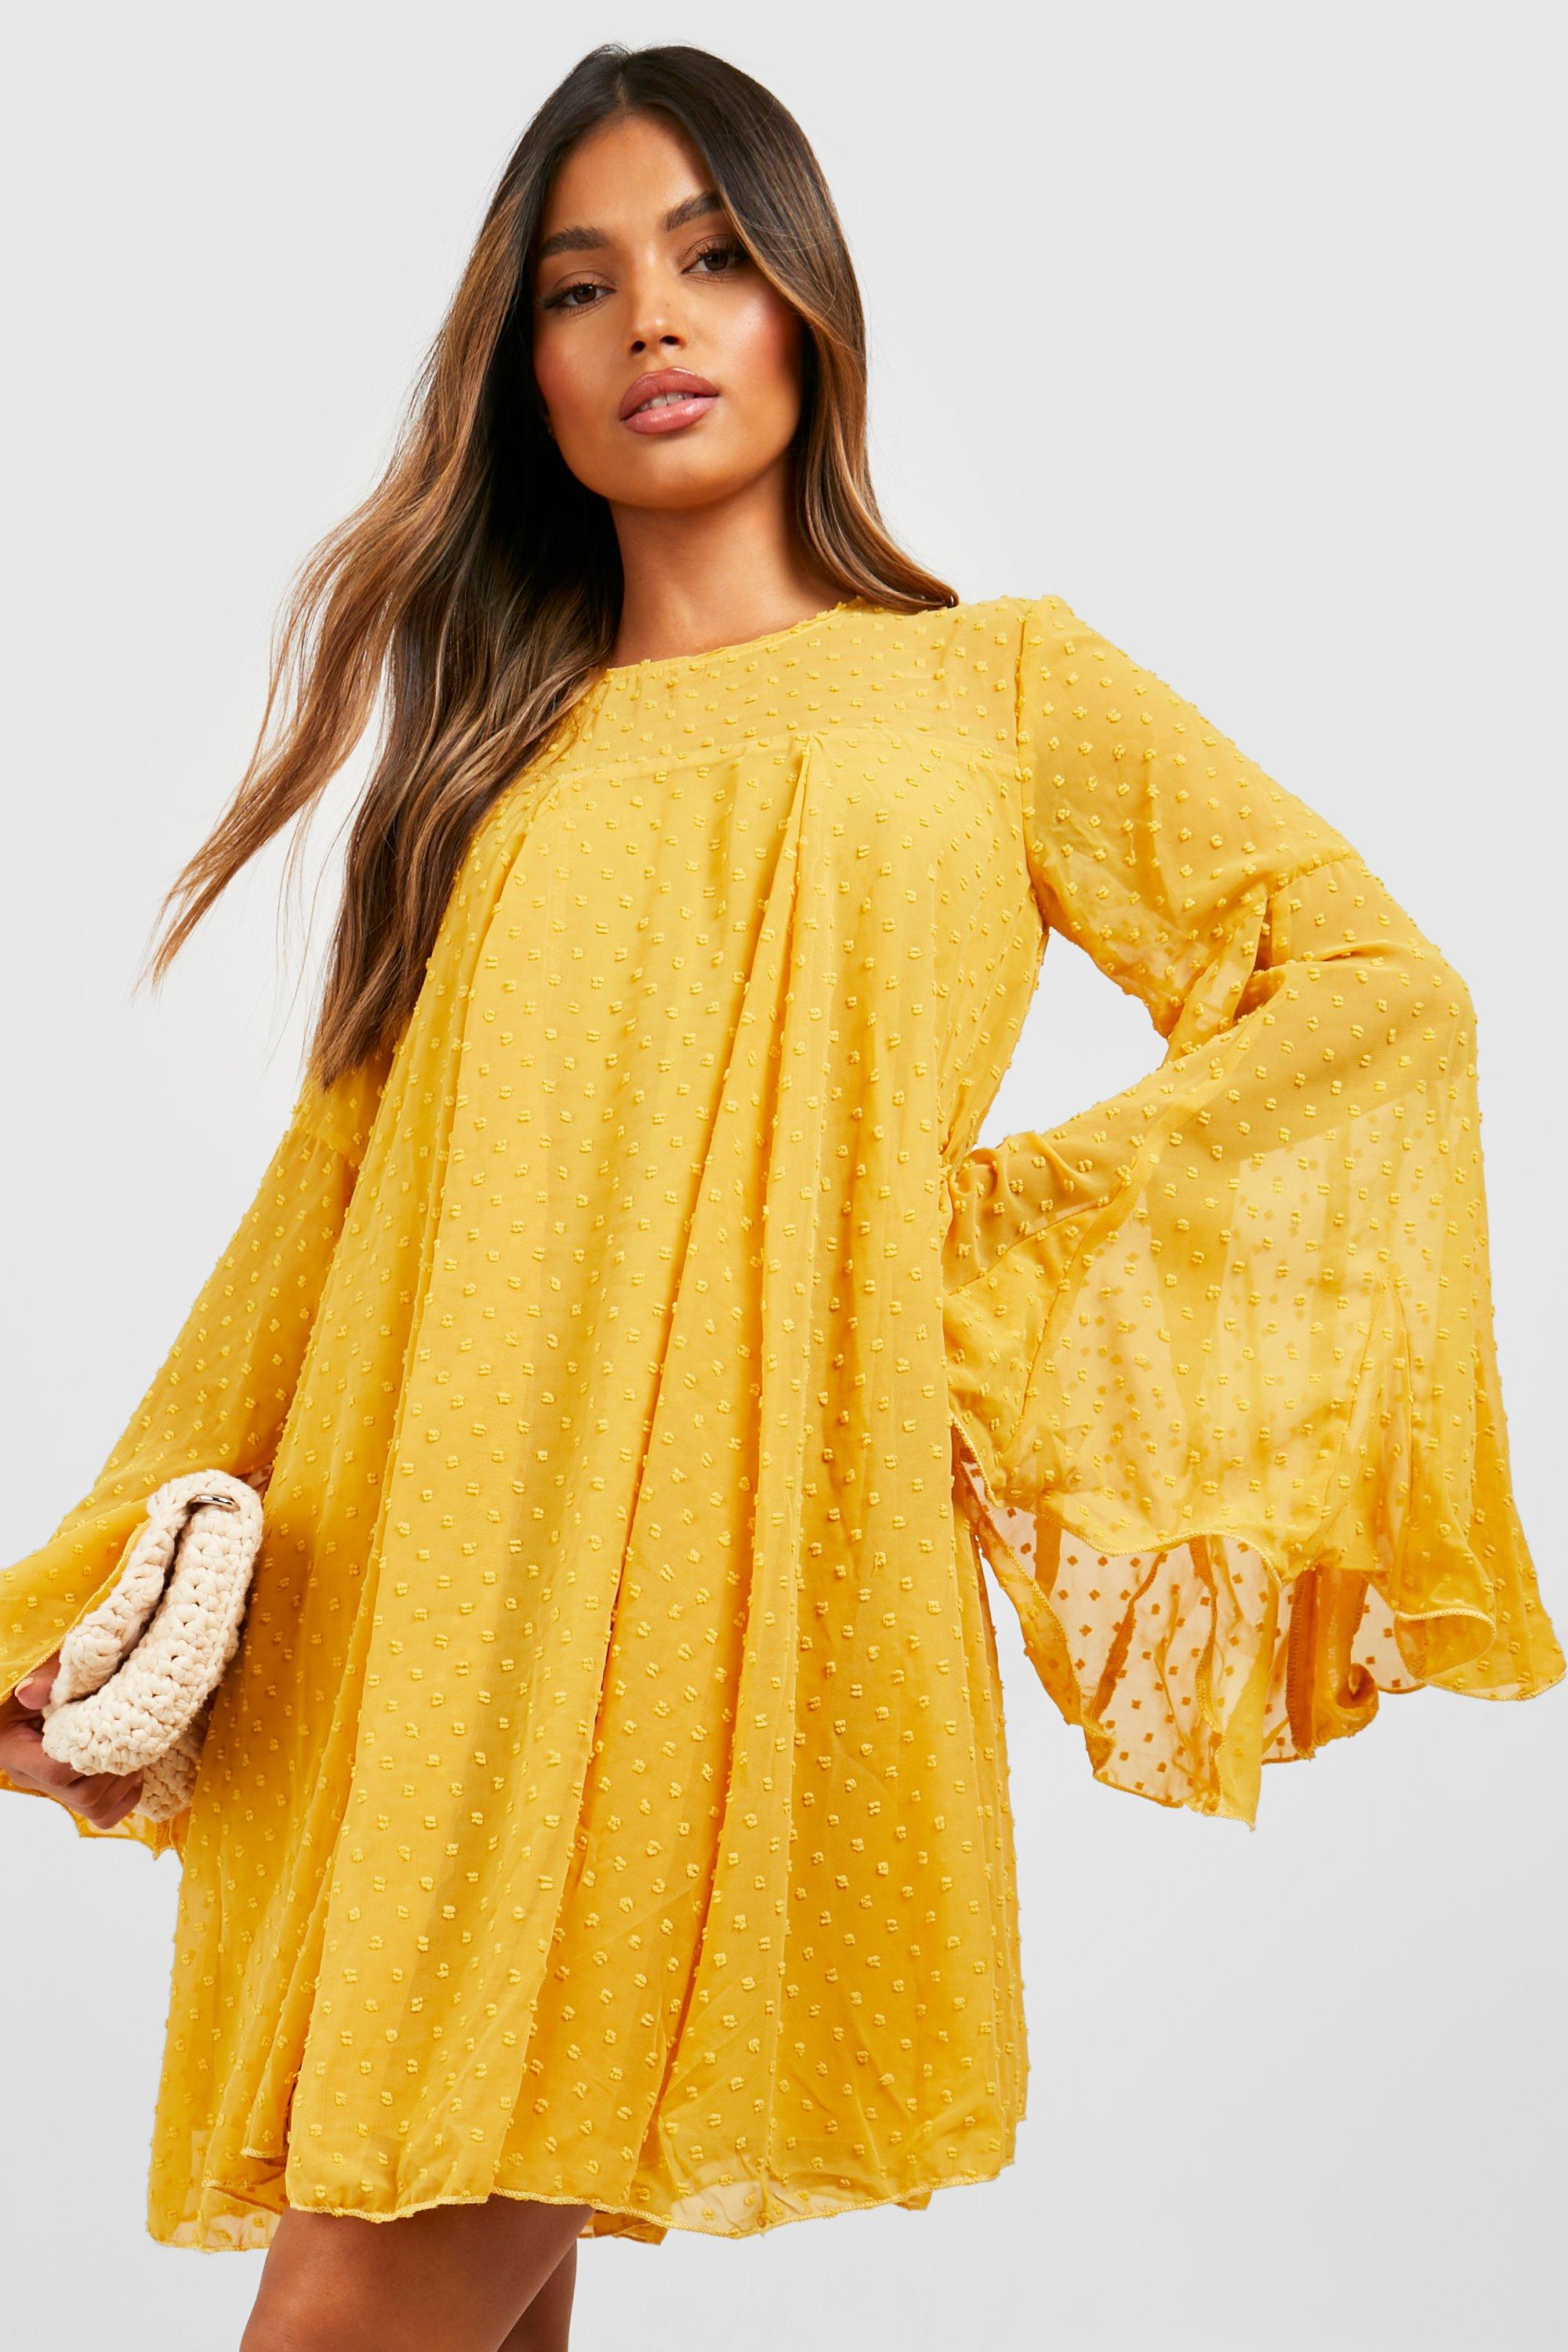 70s Clothes & 1970s Fashion Womens Dobby Mesh Pleated Detail Smock Dress - Yellow - 6 $24.00 AT vintagedancer.com